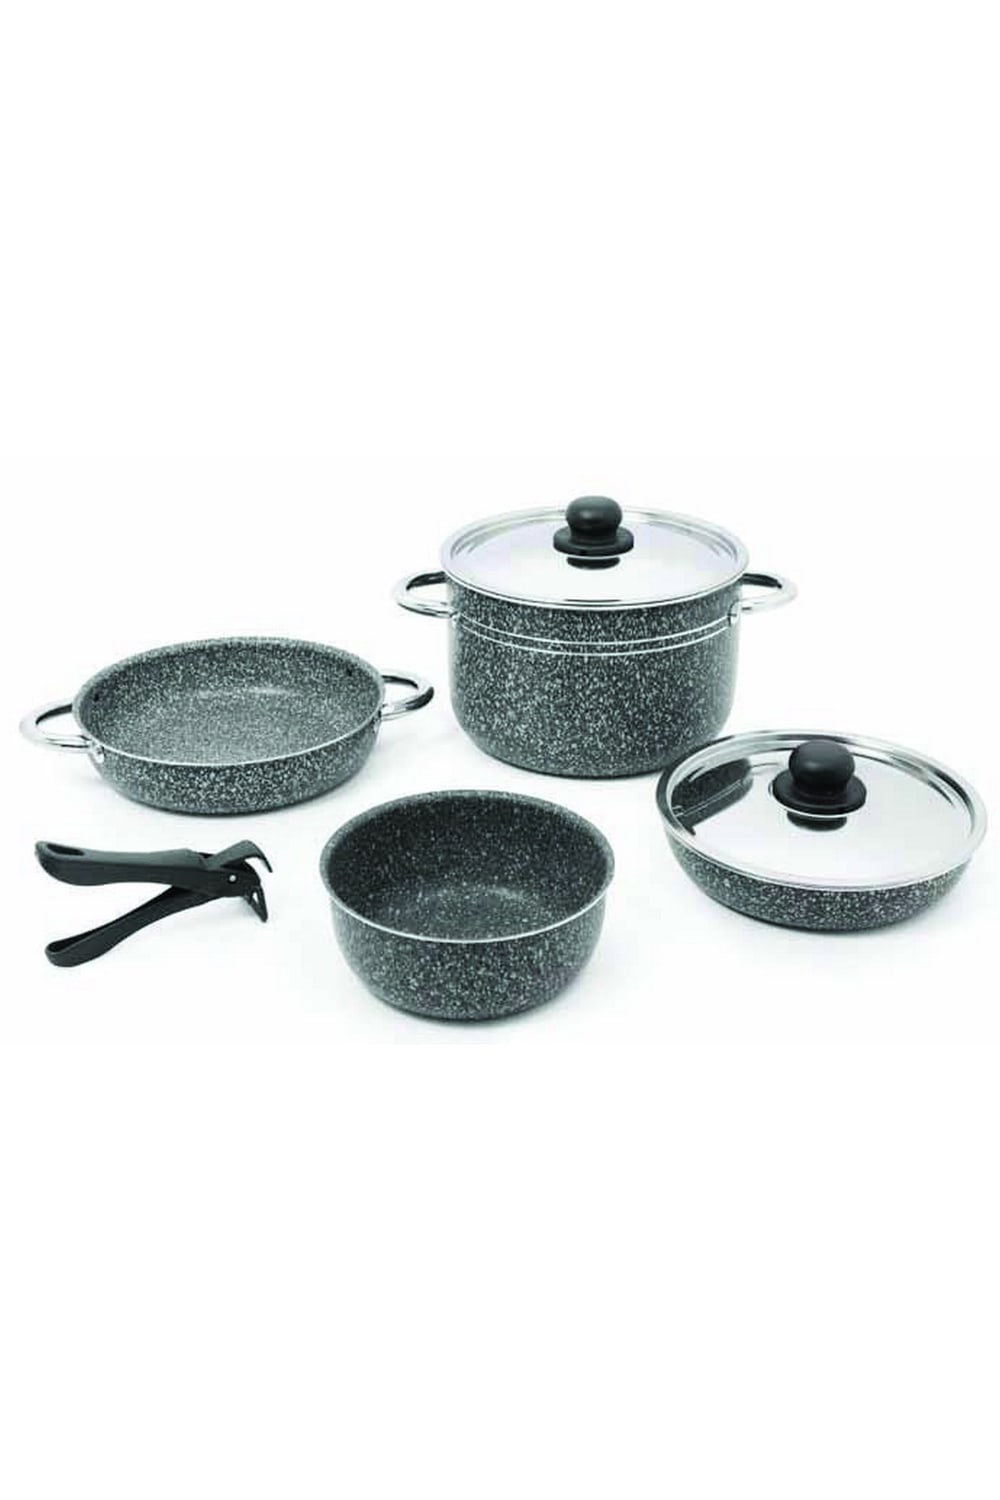 Beaver Brand Stone Rock 20 Cookware Set (Grey) (One Size)